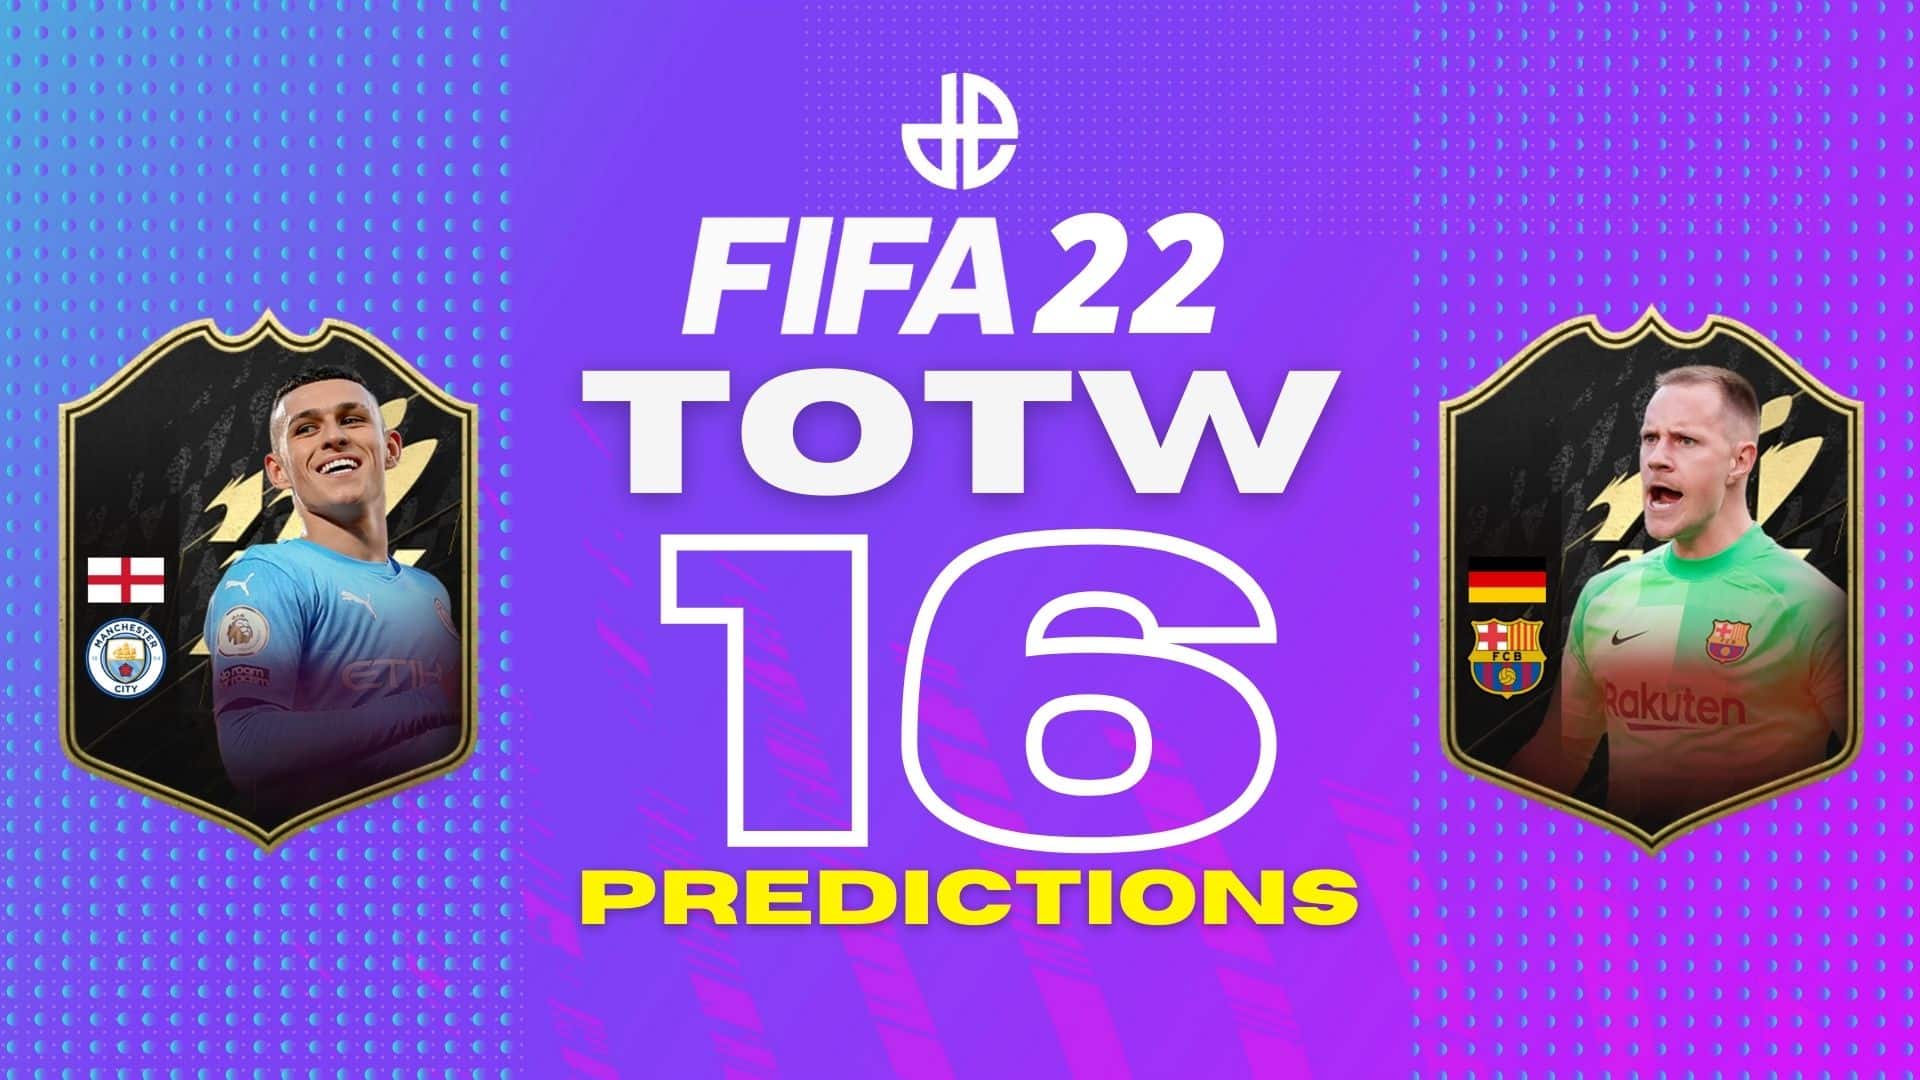 FIFA 22 TOTW 16 cards and predictions